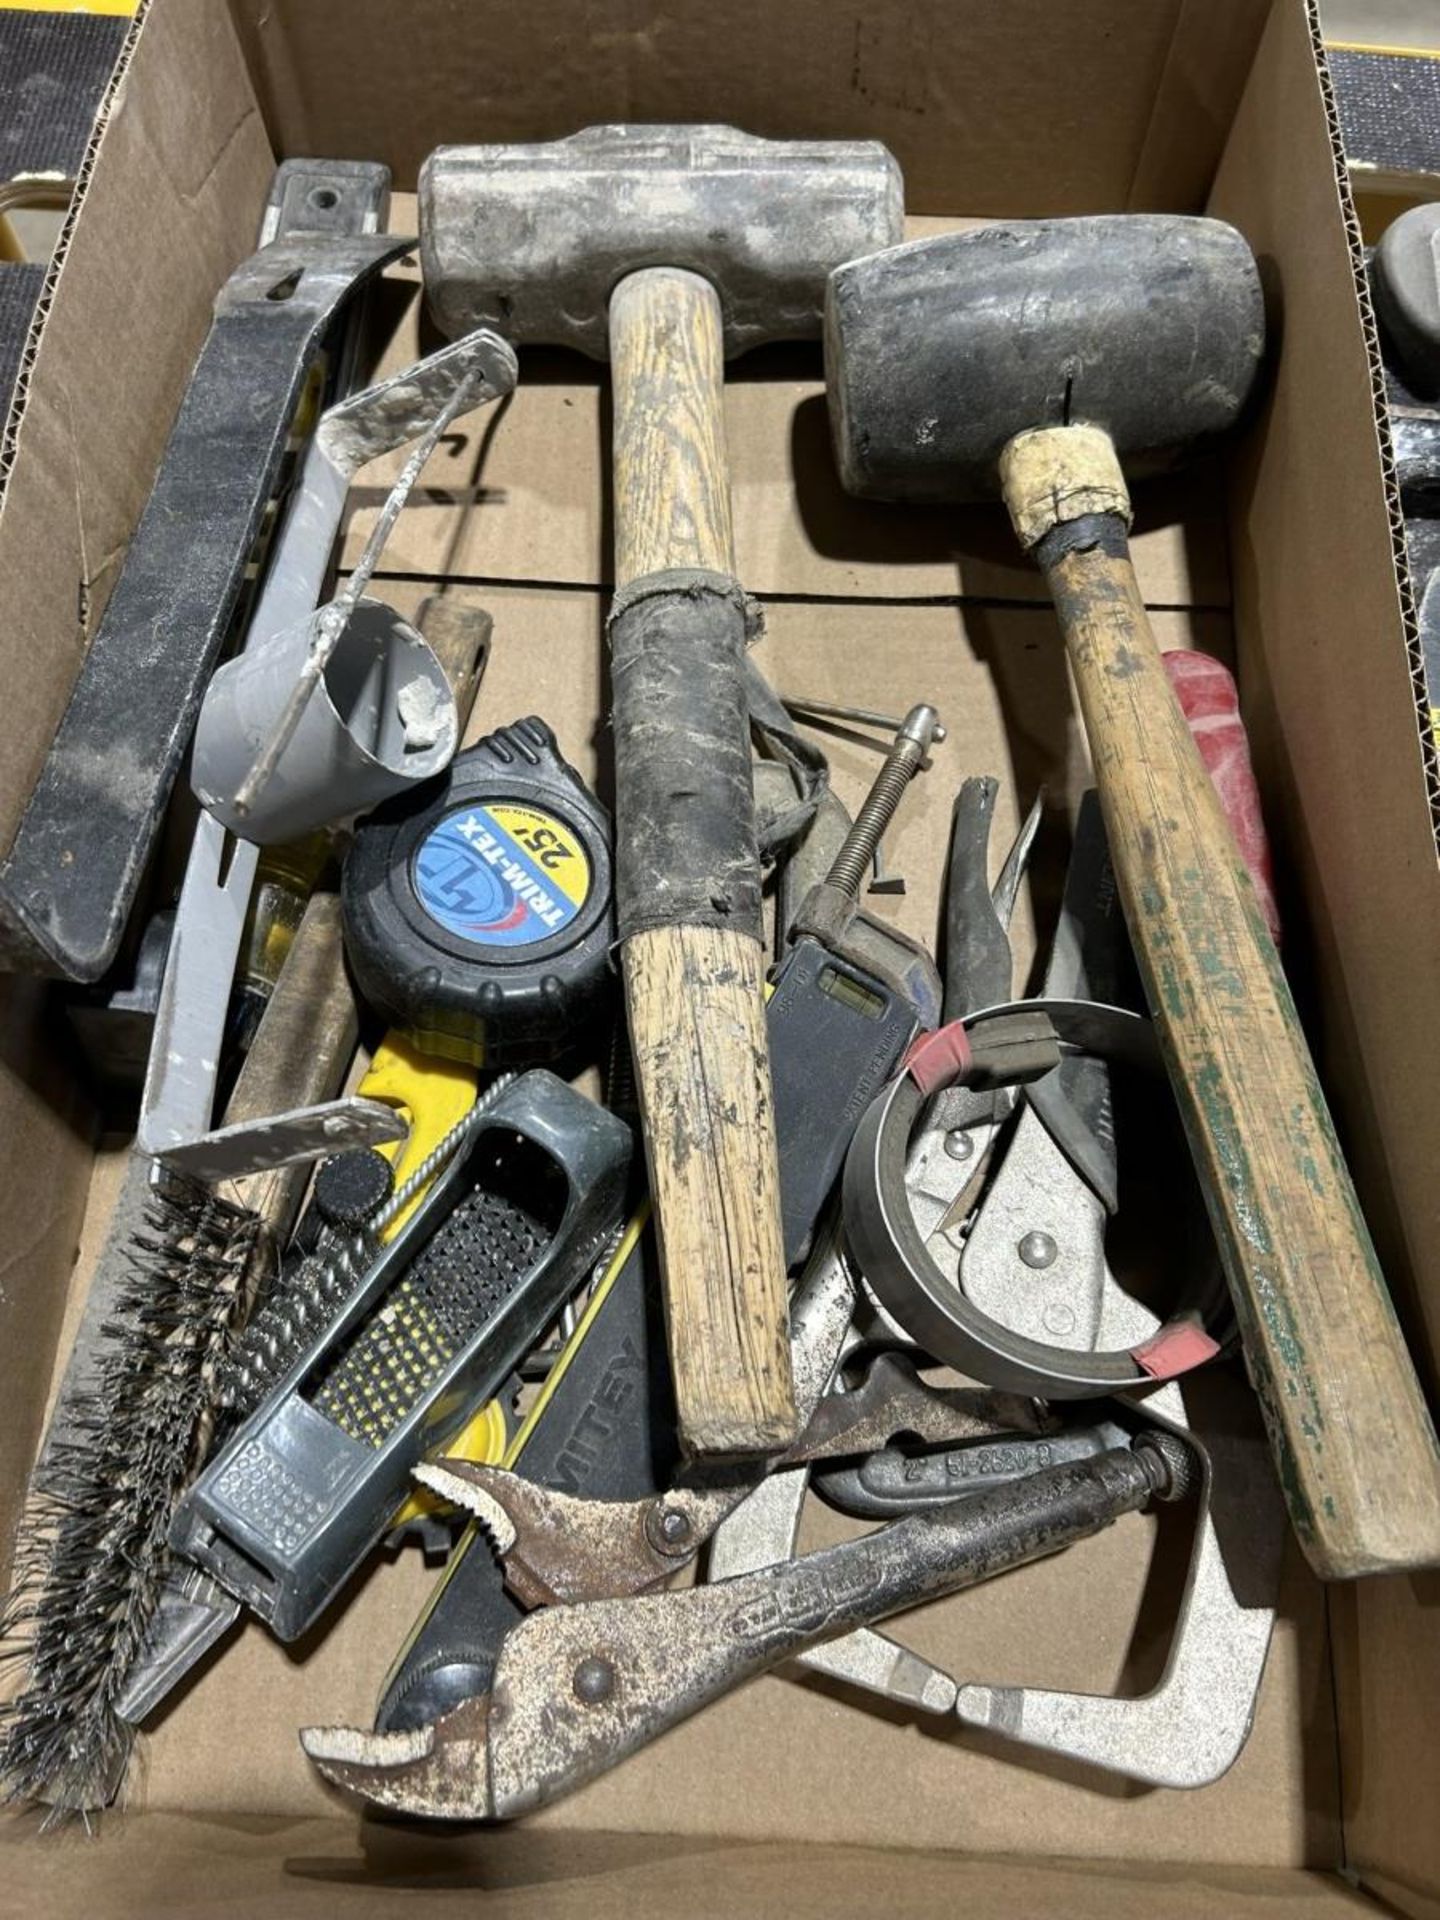 L/O ASSORTED HAND TOOLS, STEEL PIPE WRENCH, HACK SAWS, ETC. - Image 2 of 6